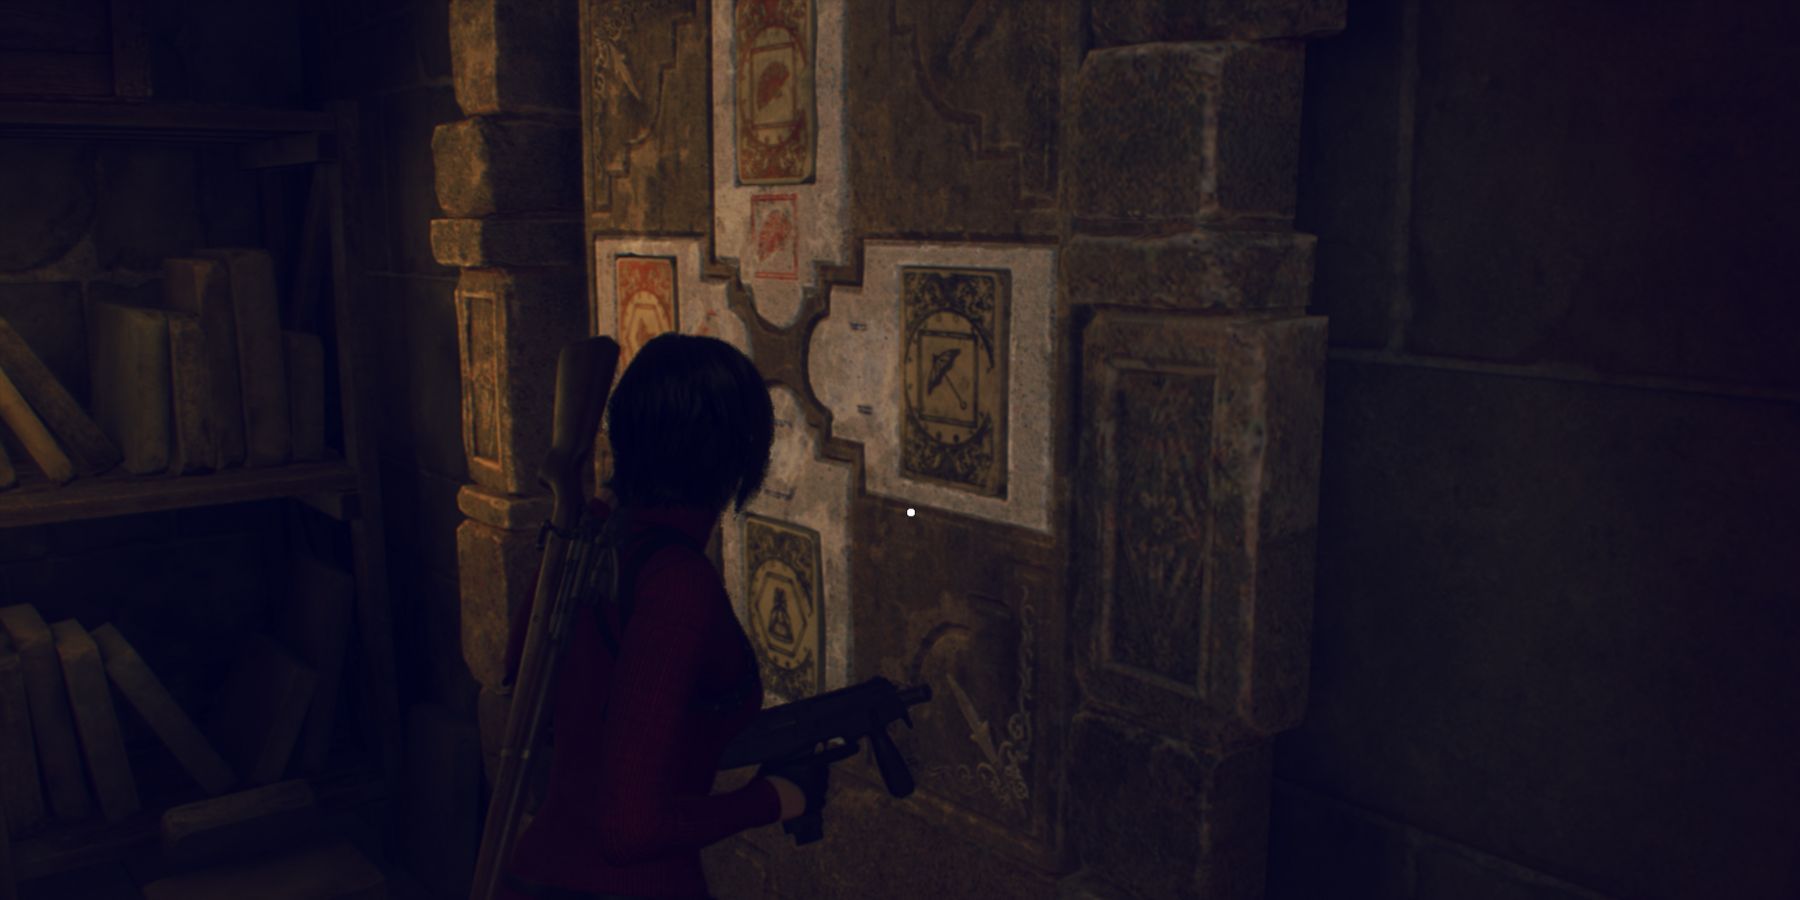 Resident Evil 4 Wall with Four Slots puzzle solution in Bindery